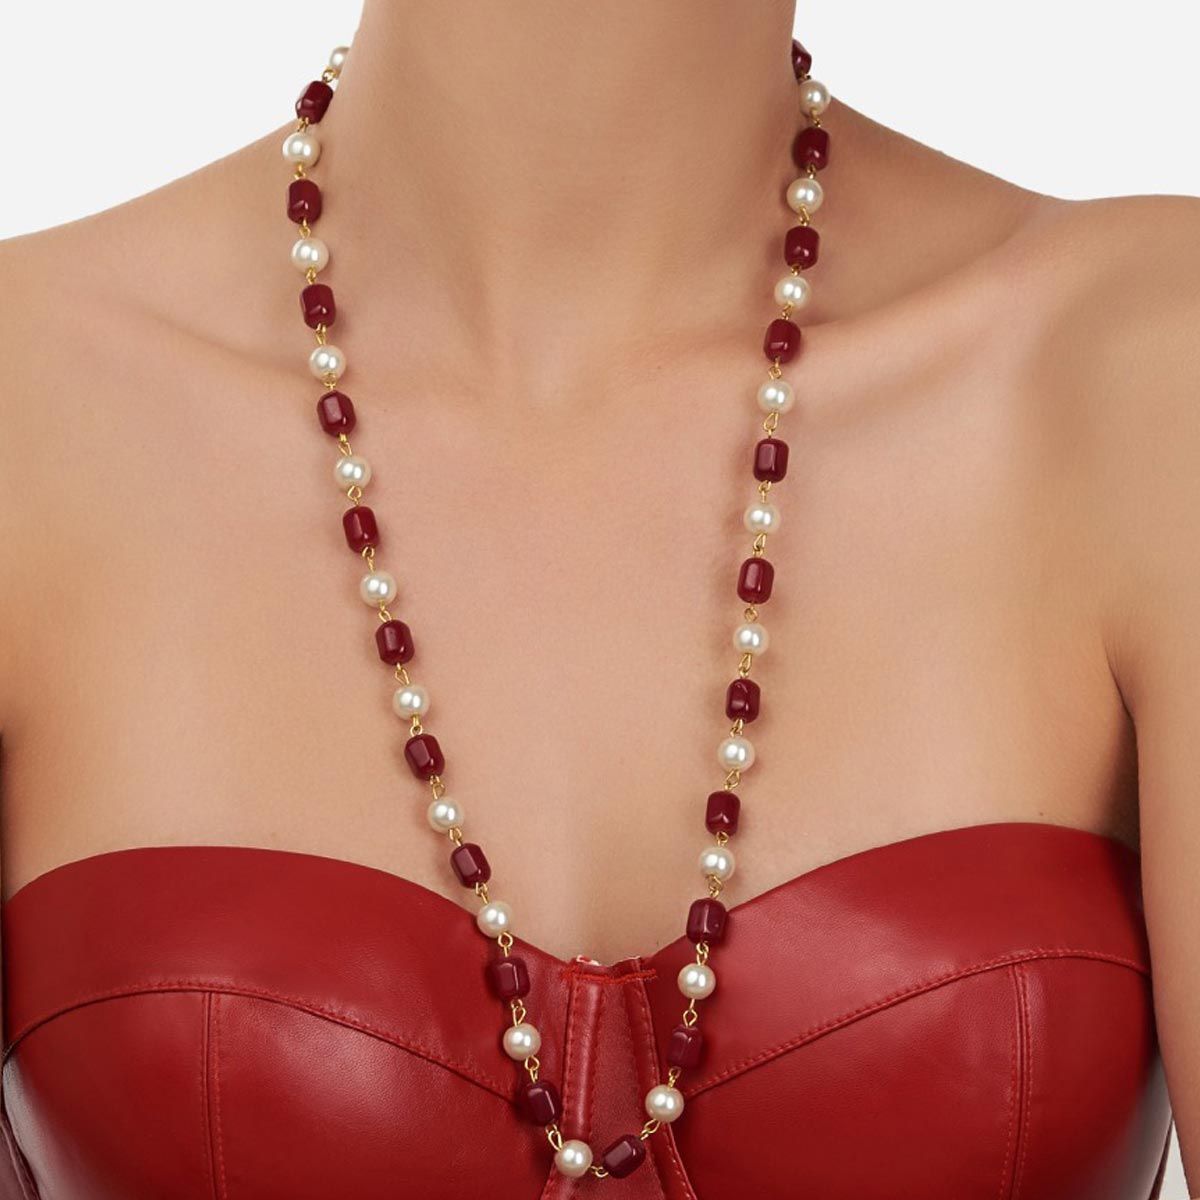 sparkle maroon white beads necklace - urban junky's collections of jewellery